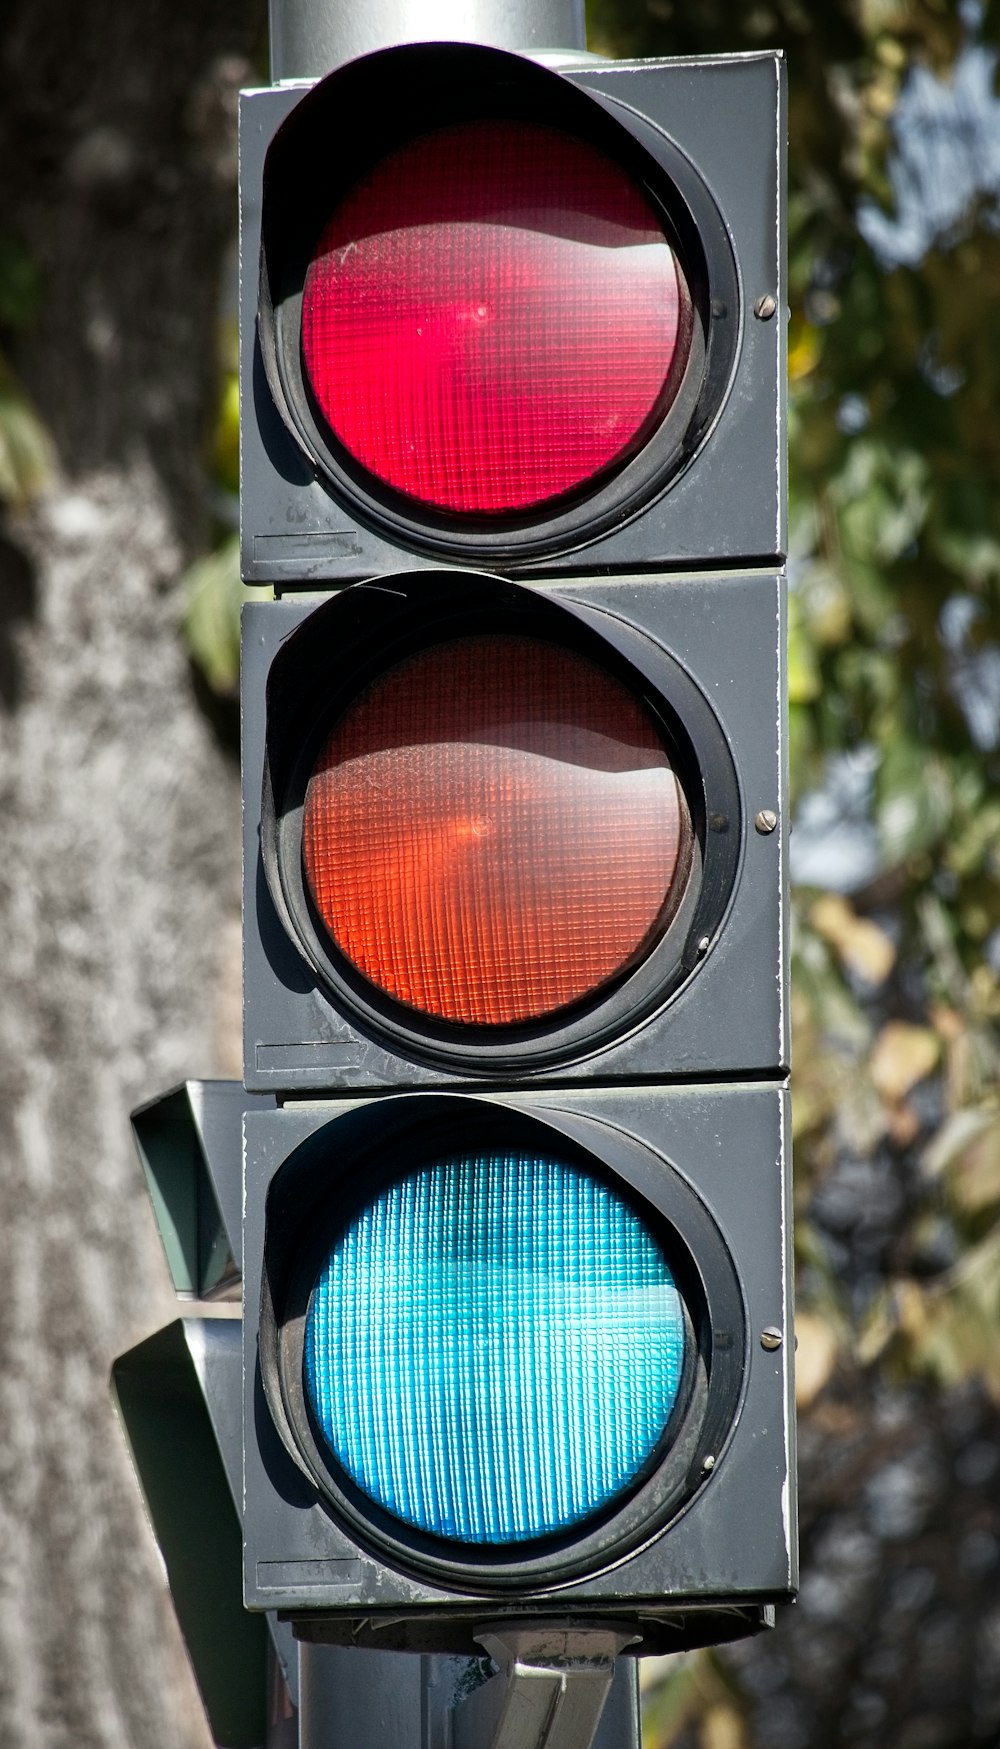 a close up of a traffic light with trees in the background